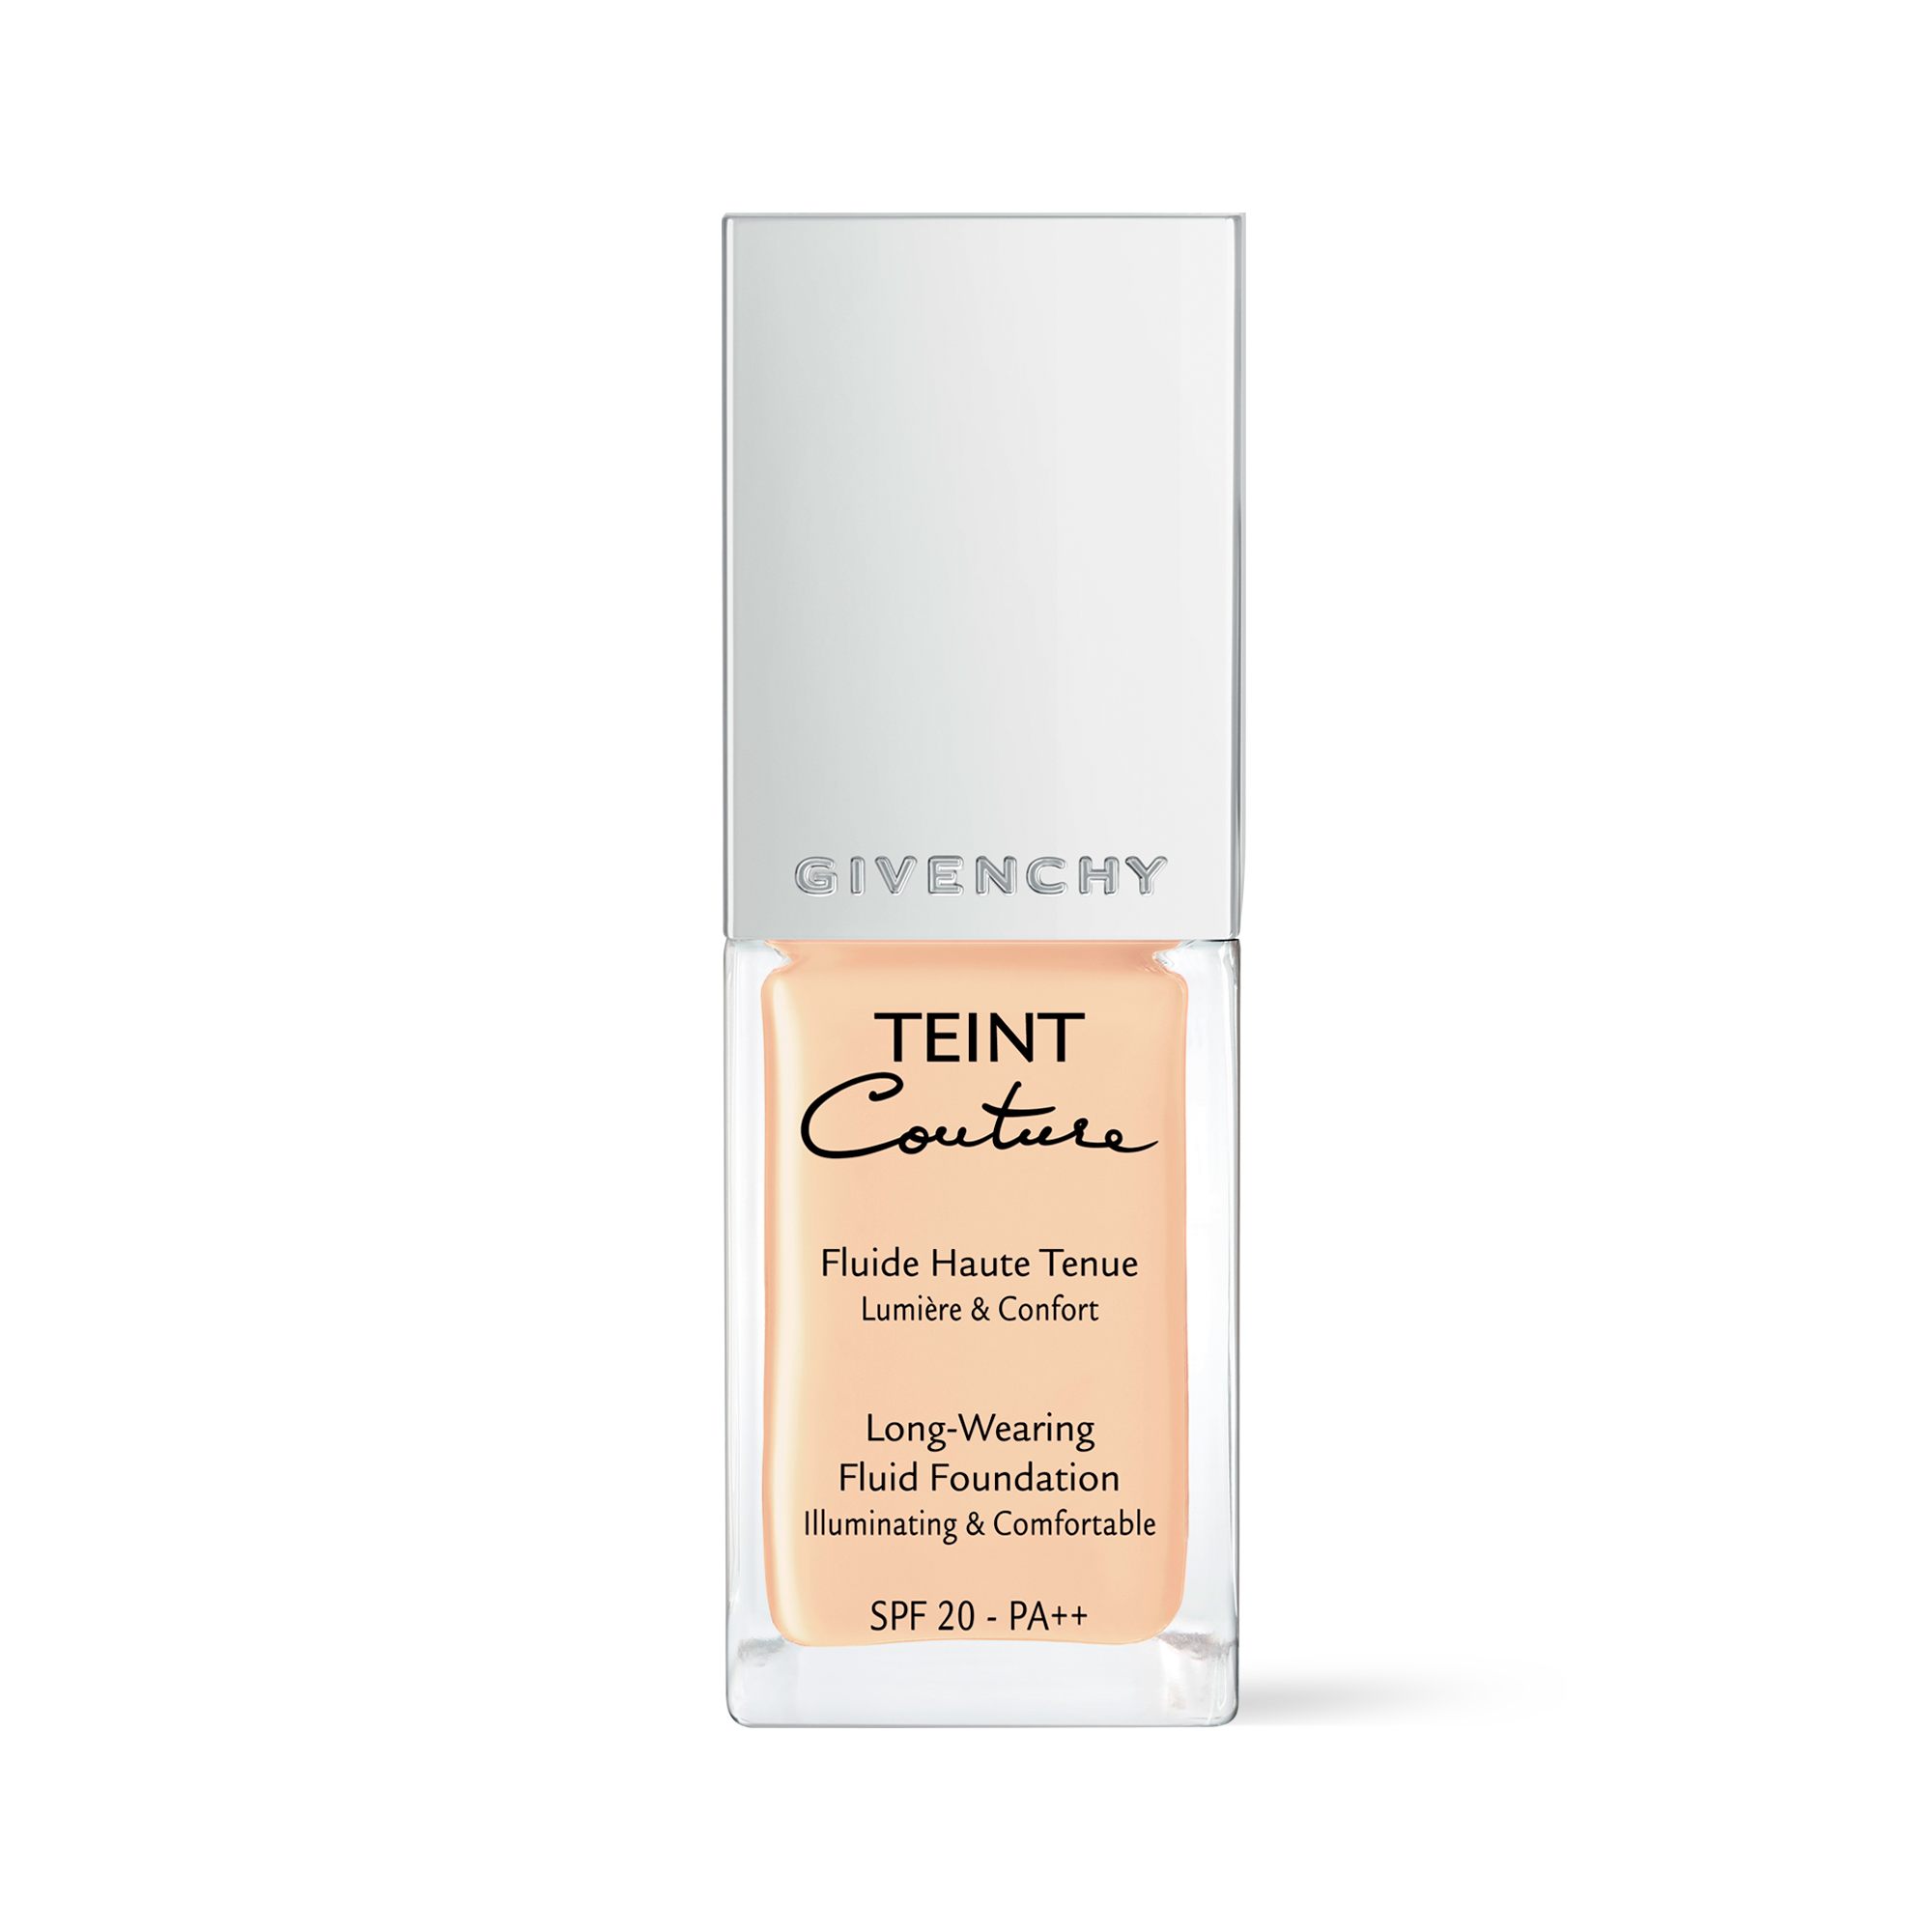 givenchy teint couture fluid foundation